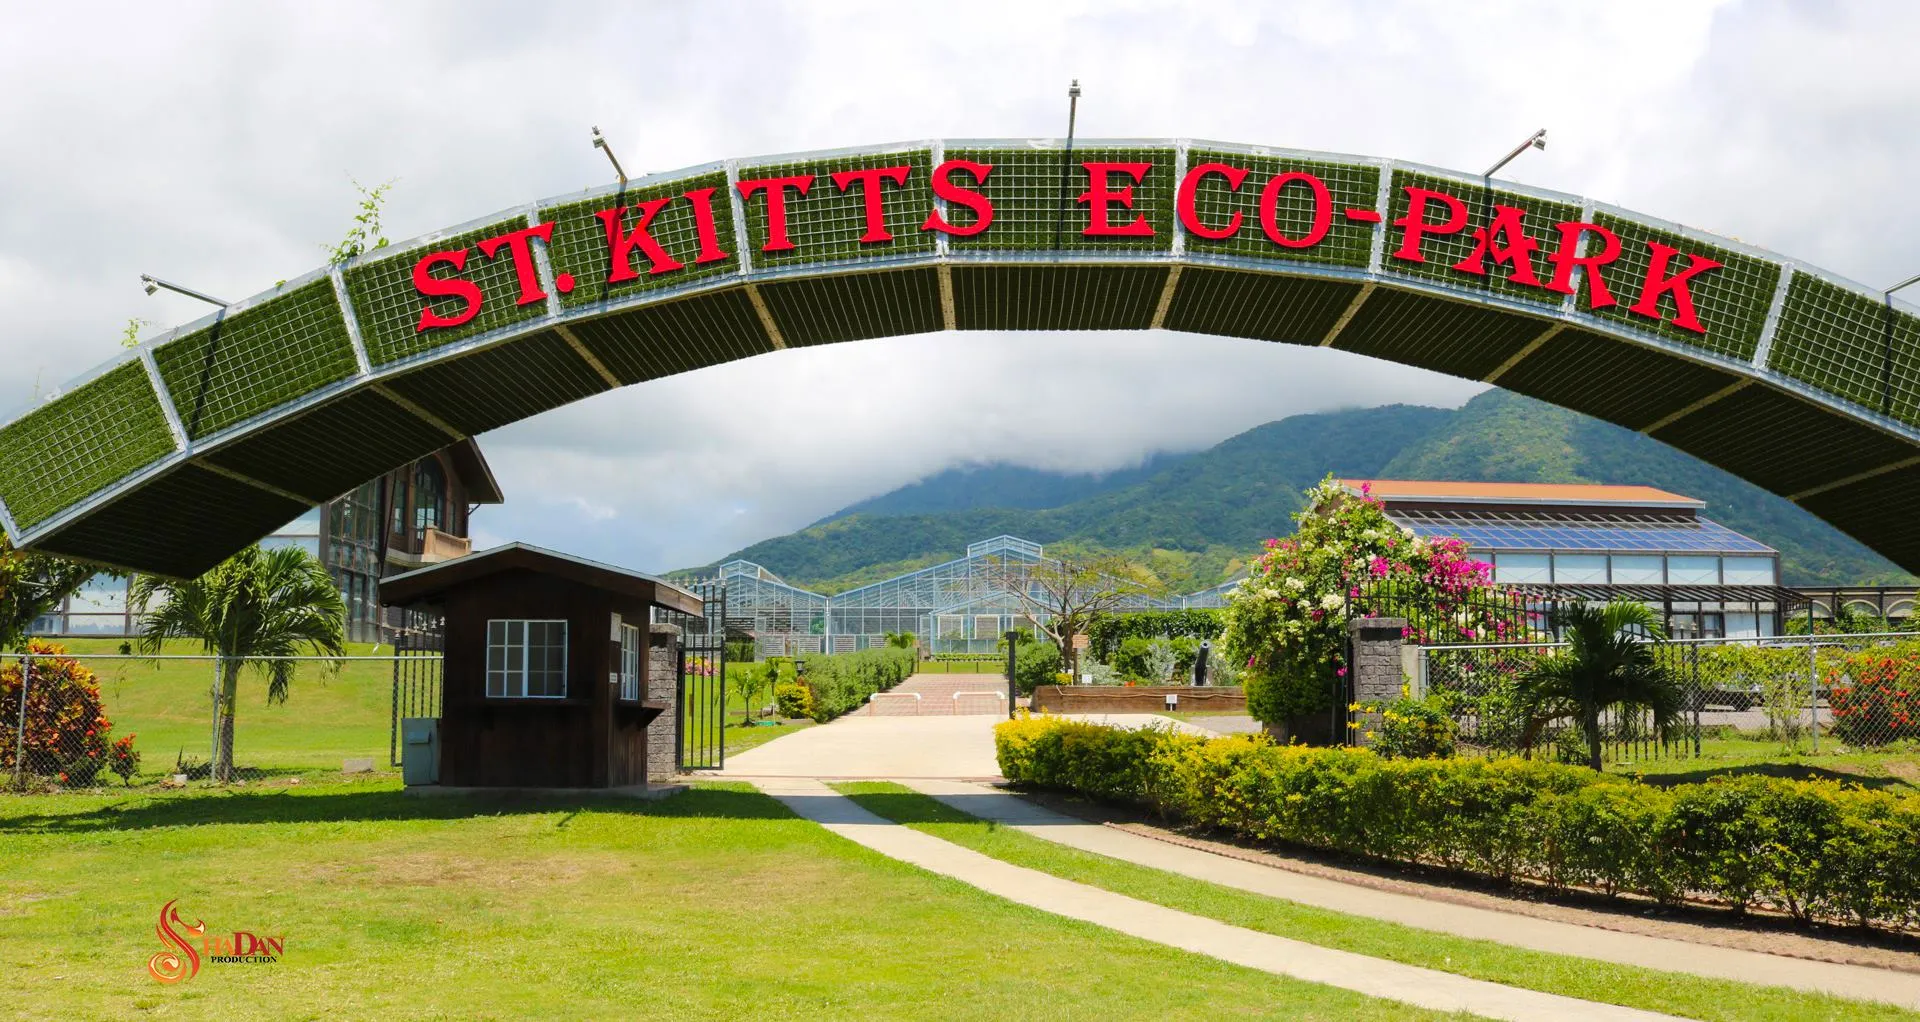 St. Kitts Eco-Park in Saint Kitts and Nevis, Caribbean | Parks - Rated 0.8